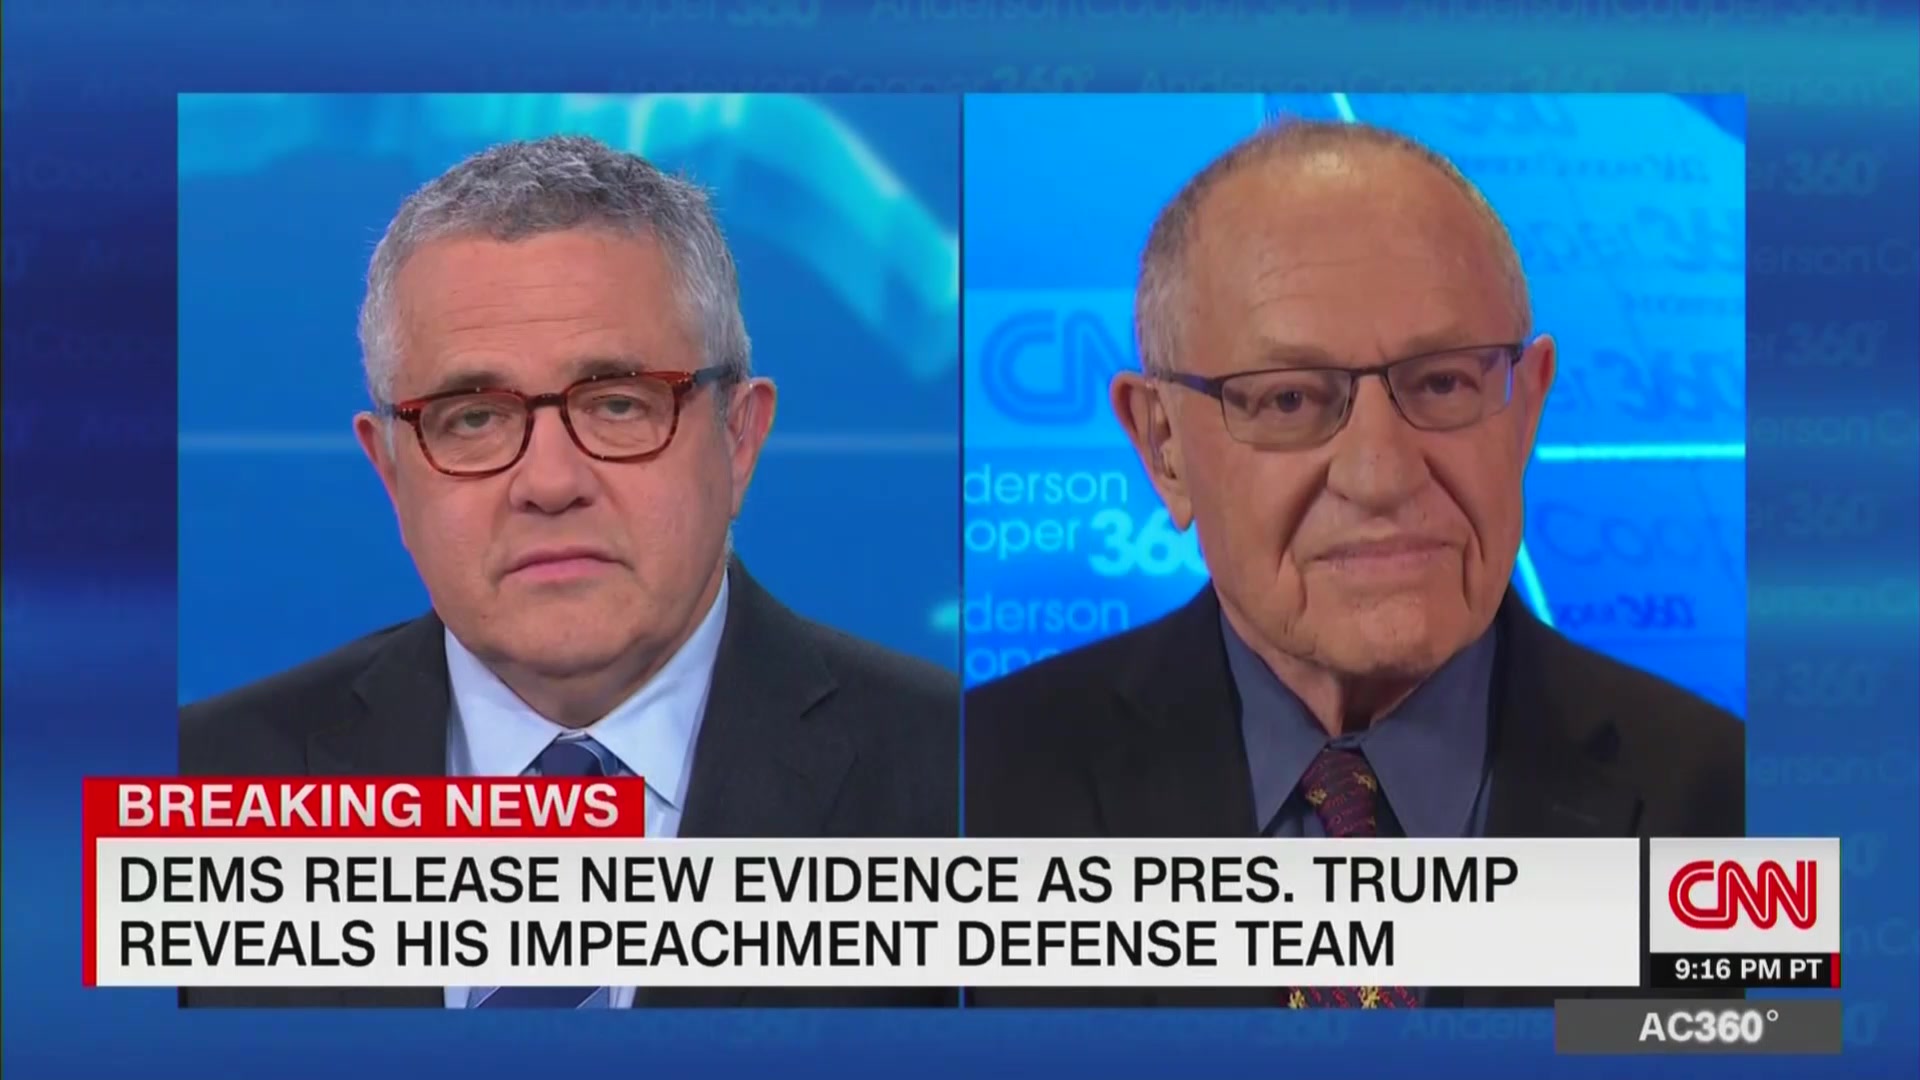 Dershowitz Says He’s ‘Not Part of the Strategic Legal Team’ for Trump’s Trial